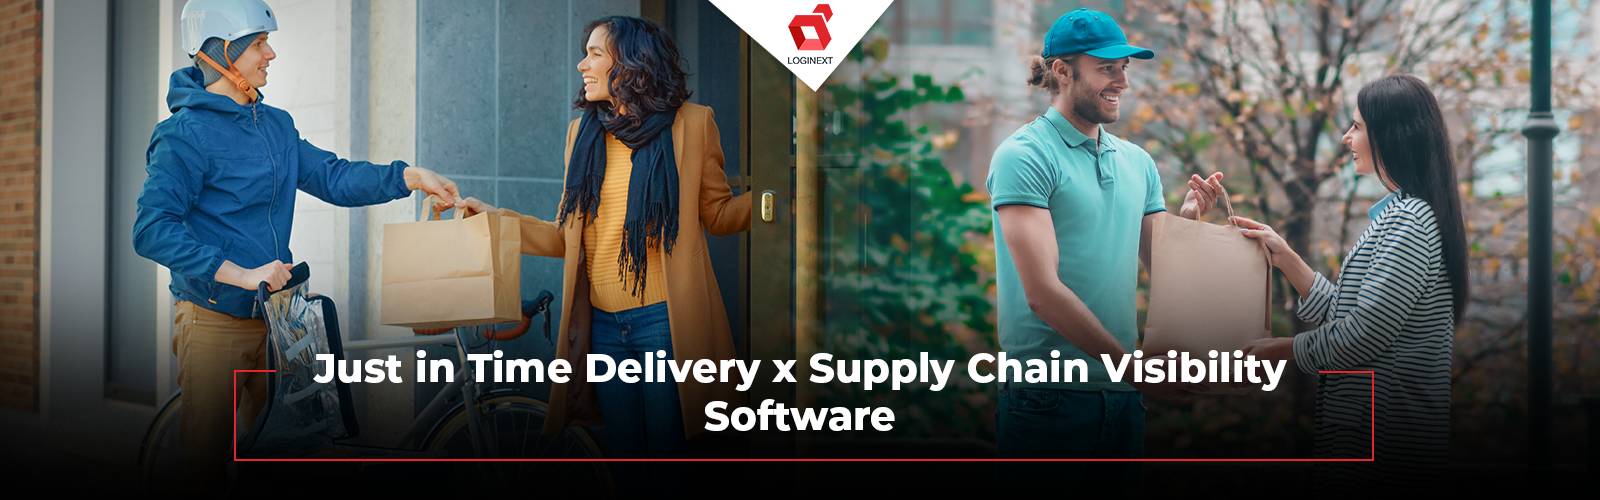 Supply chain visibility software offers just in time delivery